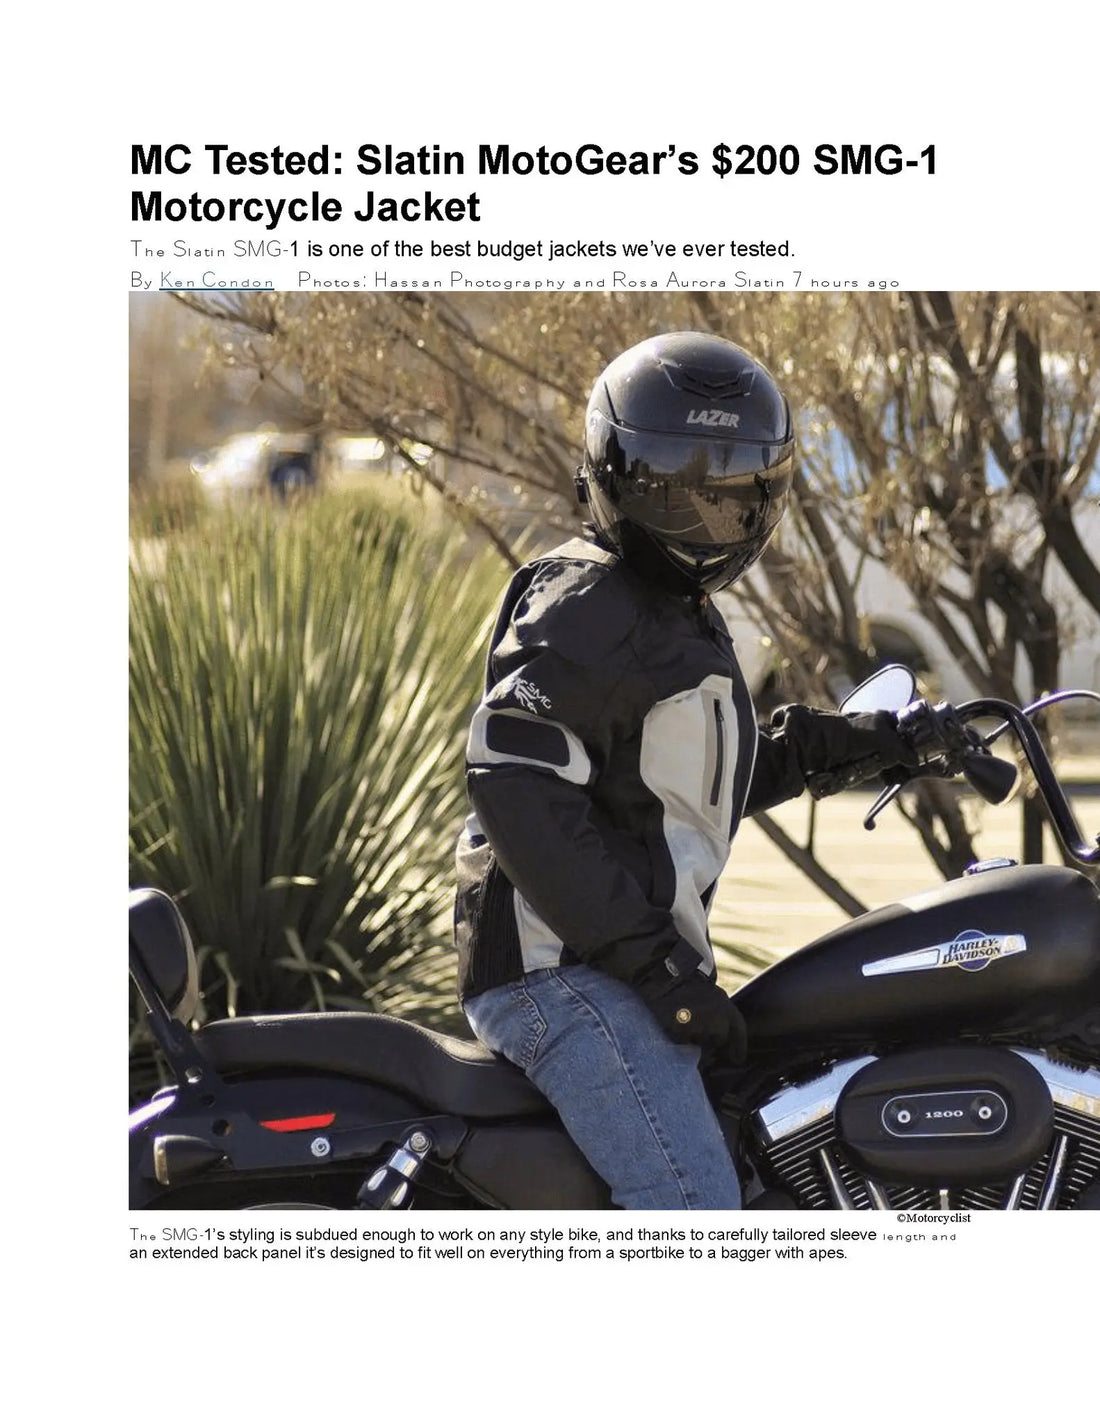 Motorcyclist Magazine's Online Website Review of the SMG-1 Winter Jacket